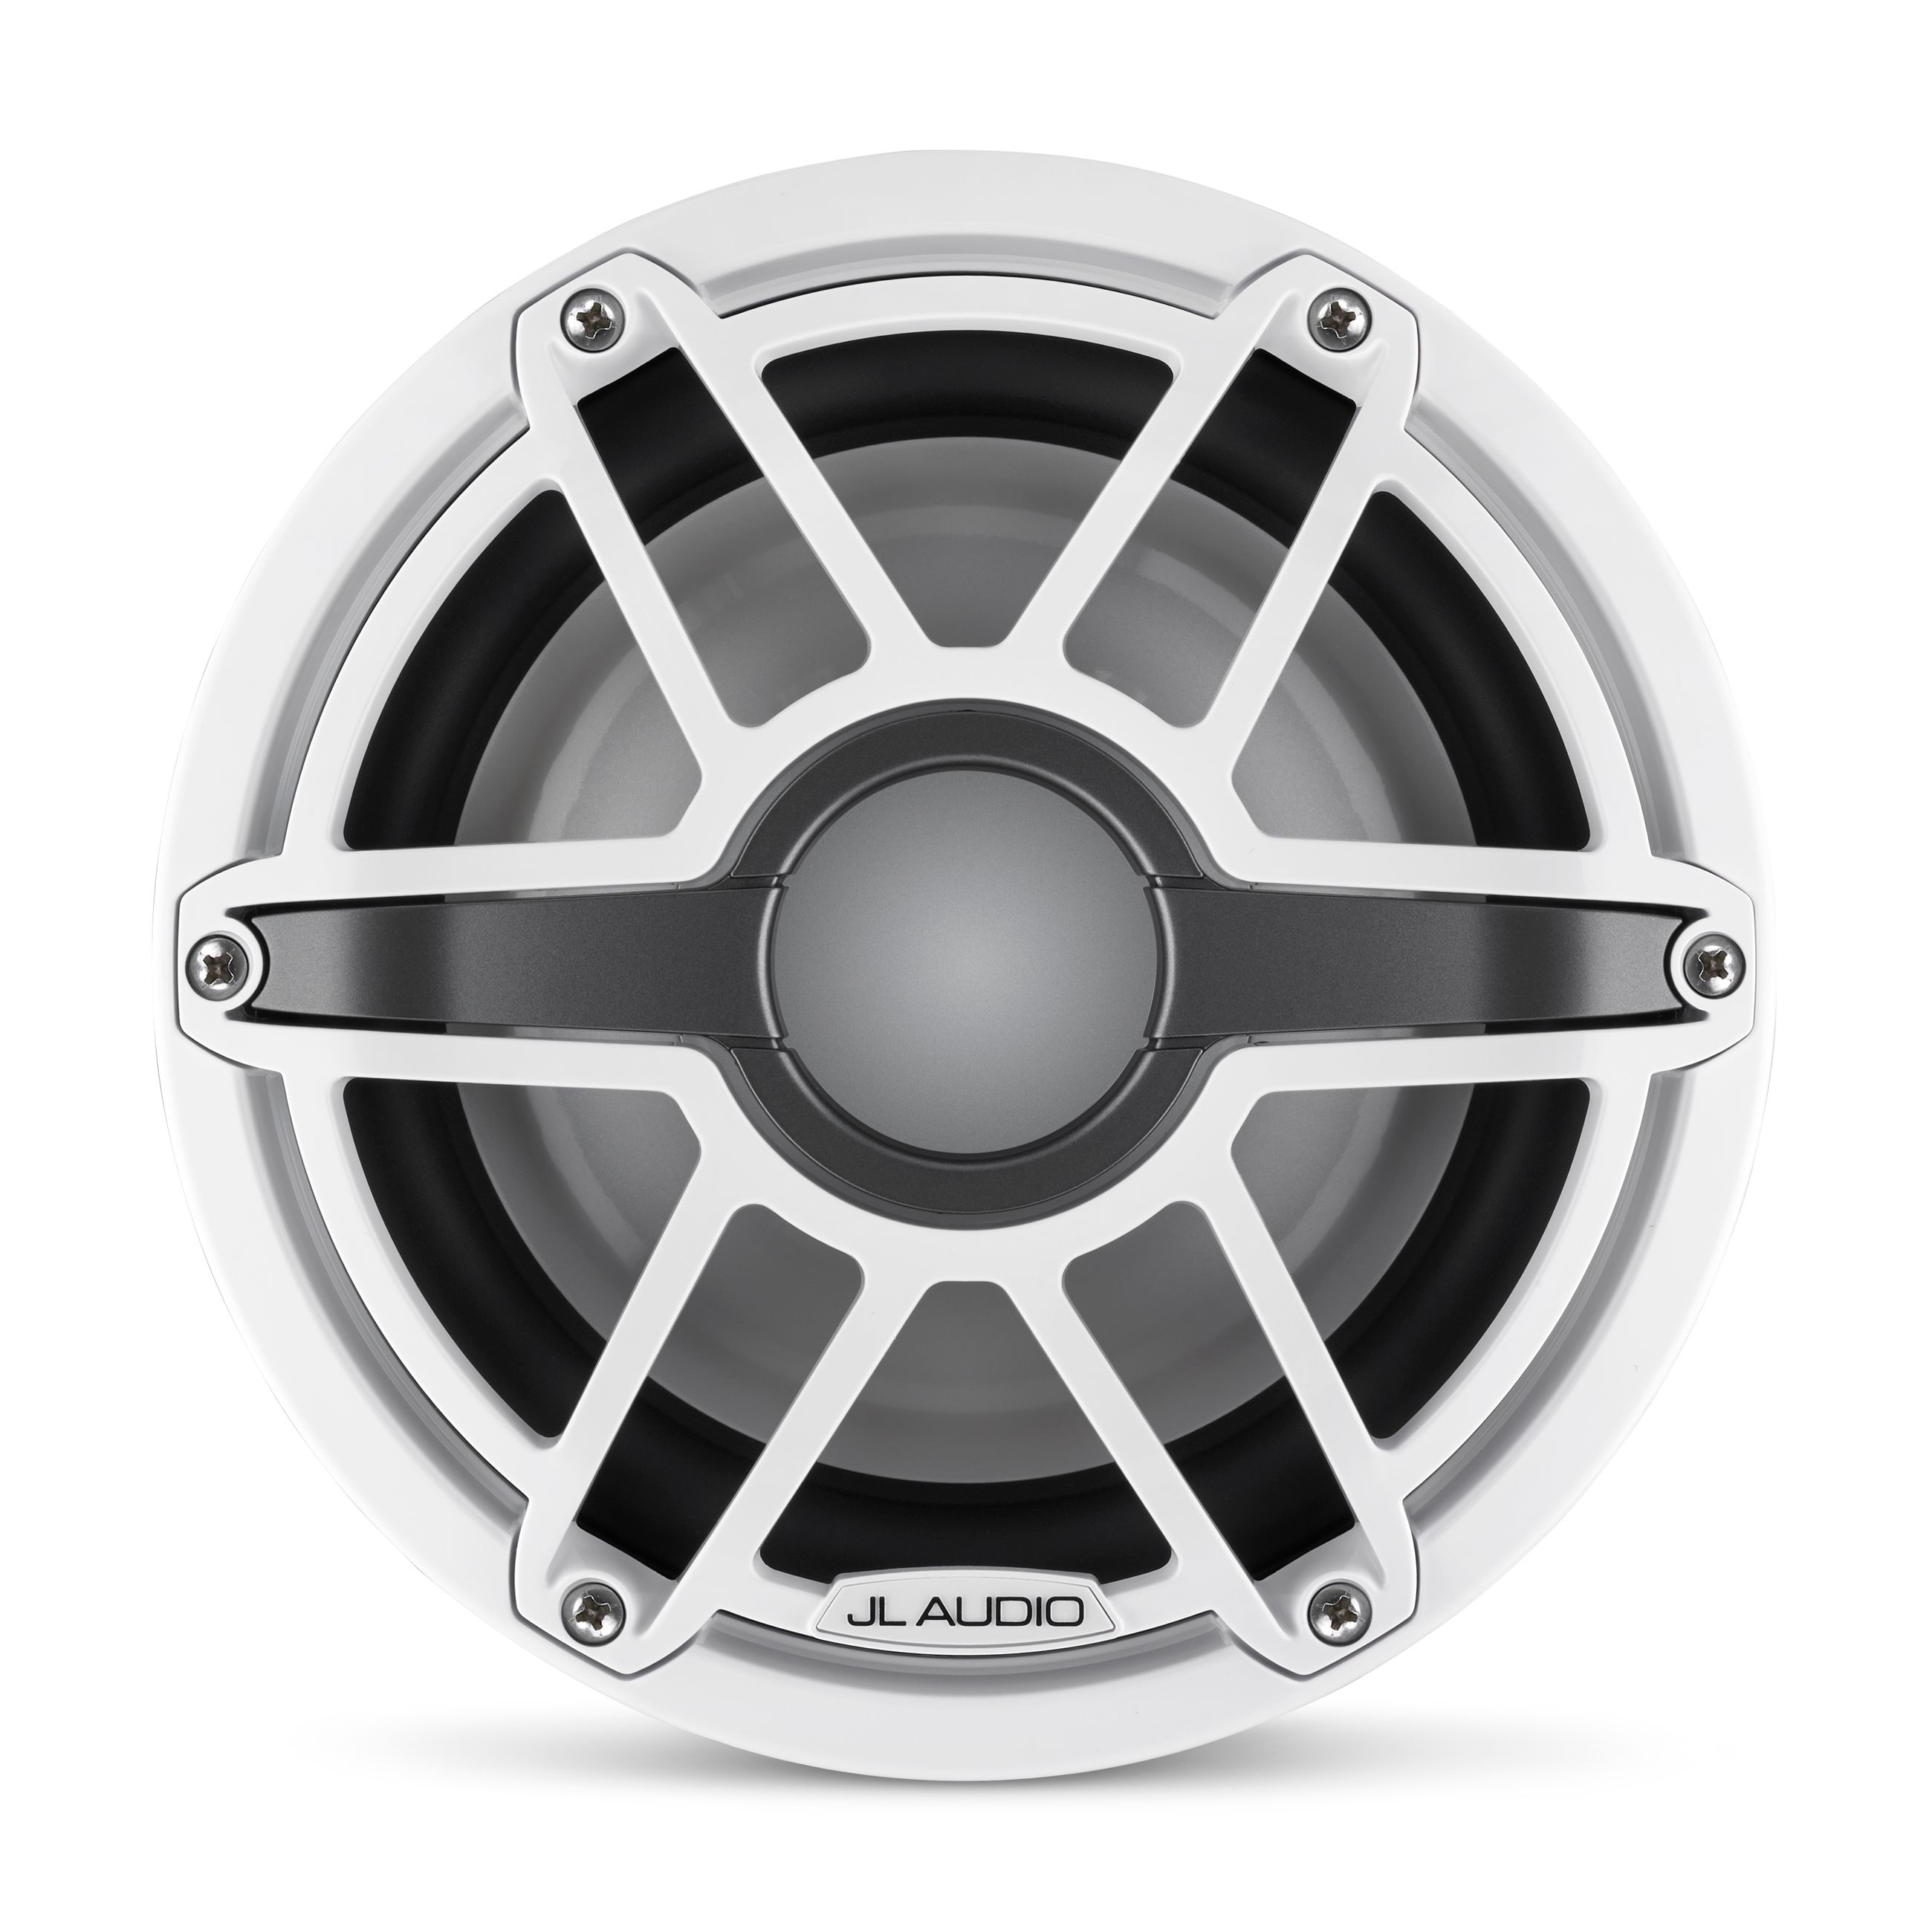 Overview image of a JL Audio M6 speaker in the 8 inch subwoofer version.